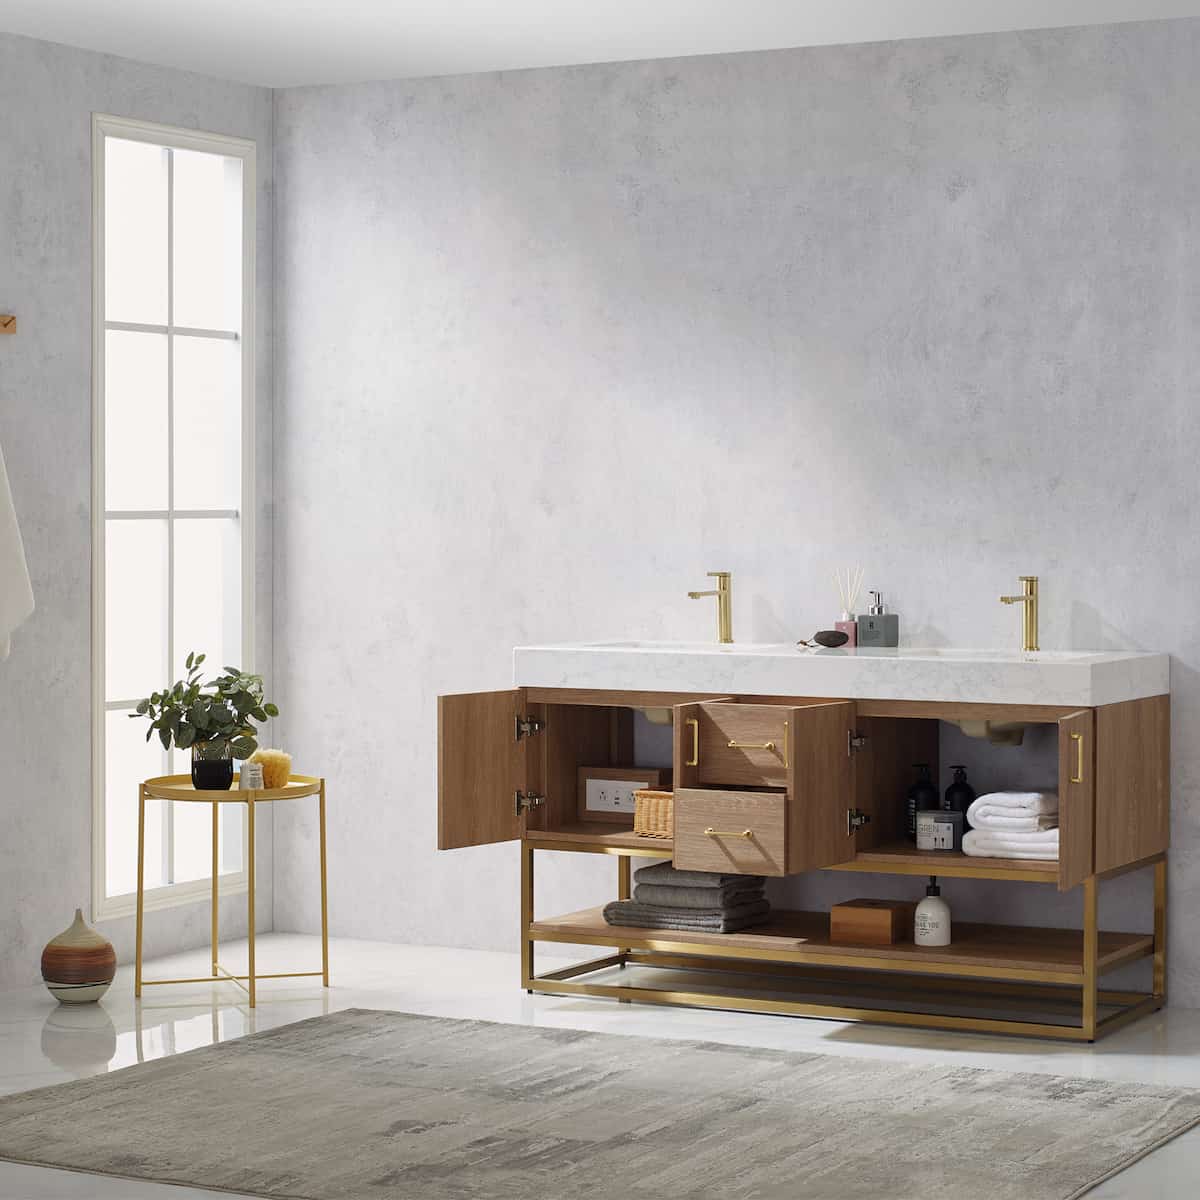 Vinnova Alistair 60 Inch Freestanding Double Vanity in North American Oak and Brushed Gold Frame with White Grain Stone Countertop Without Mirror Inside 789060-NO-GW-NM